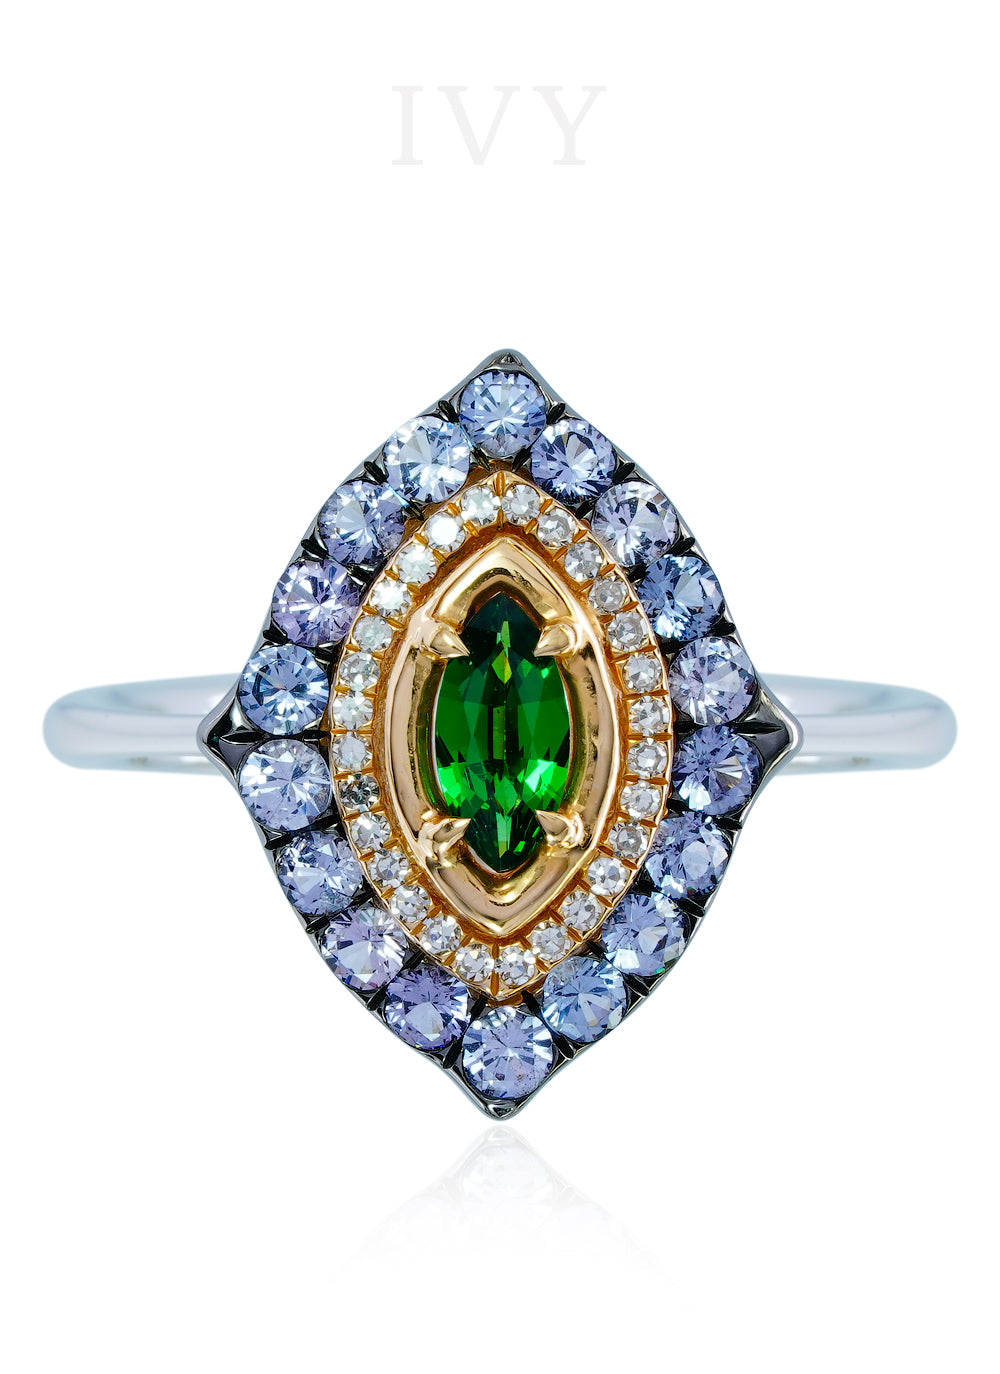 La Marchesa Ring with Tsavorite and Grey Spinel